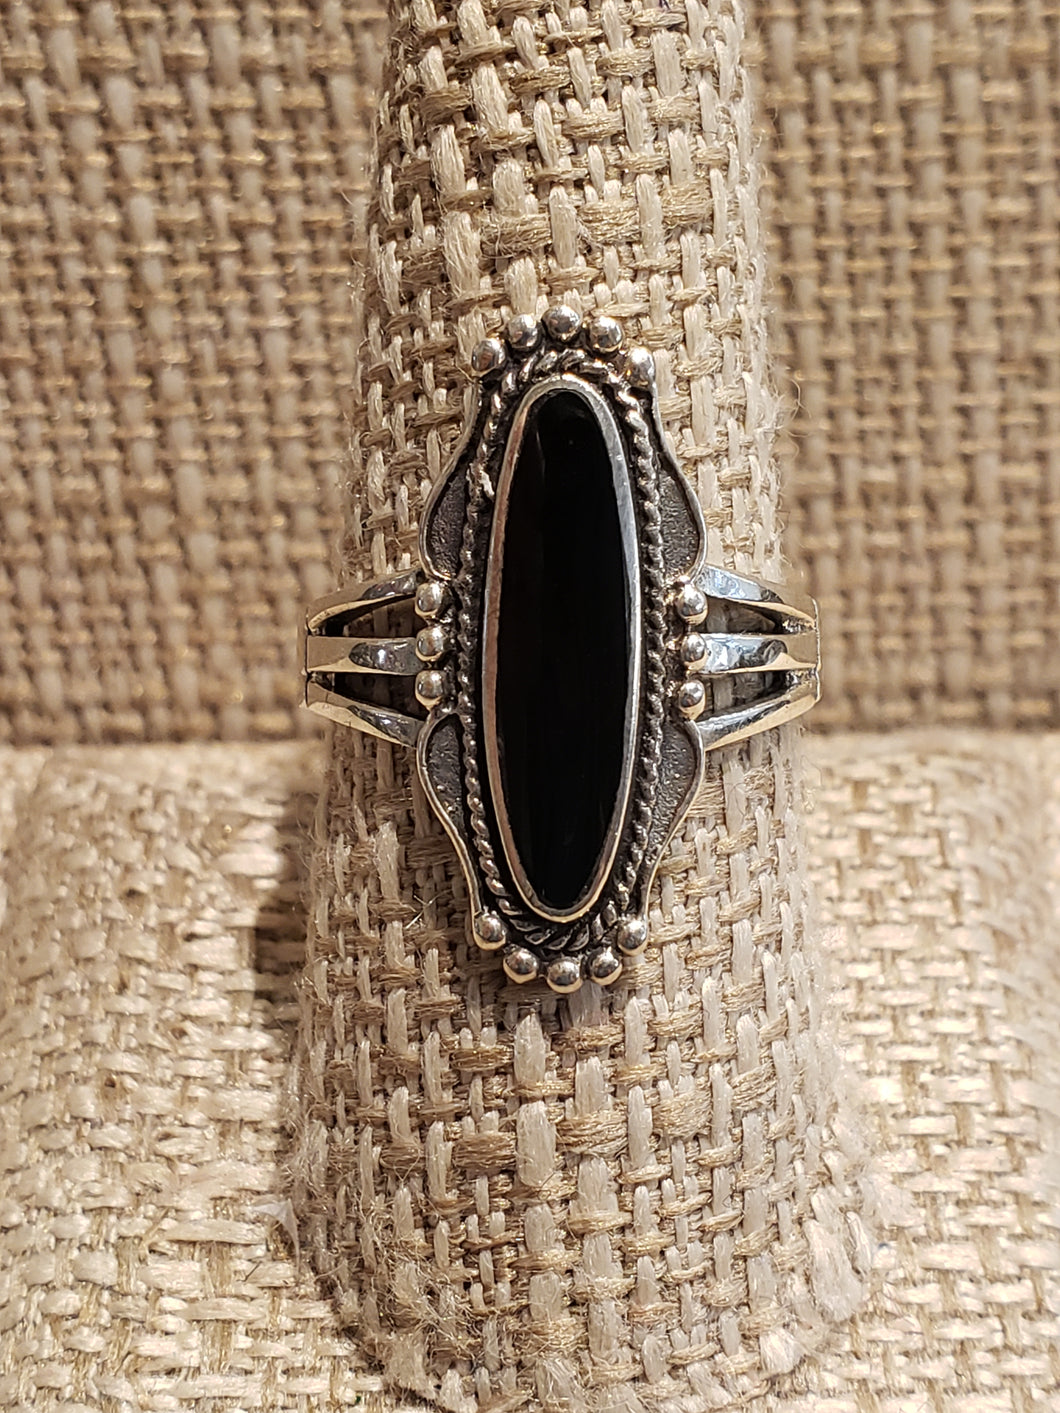 ONYX RING - 2 SIZES AVAILABLE